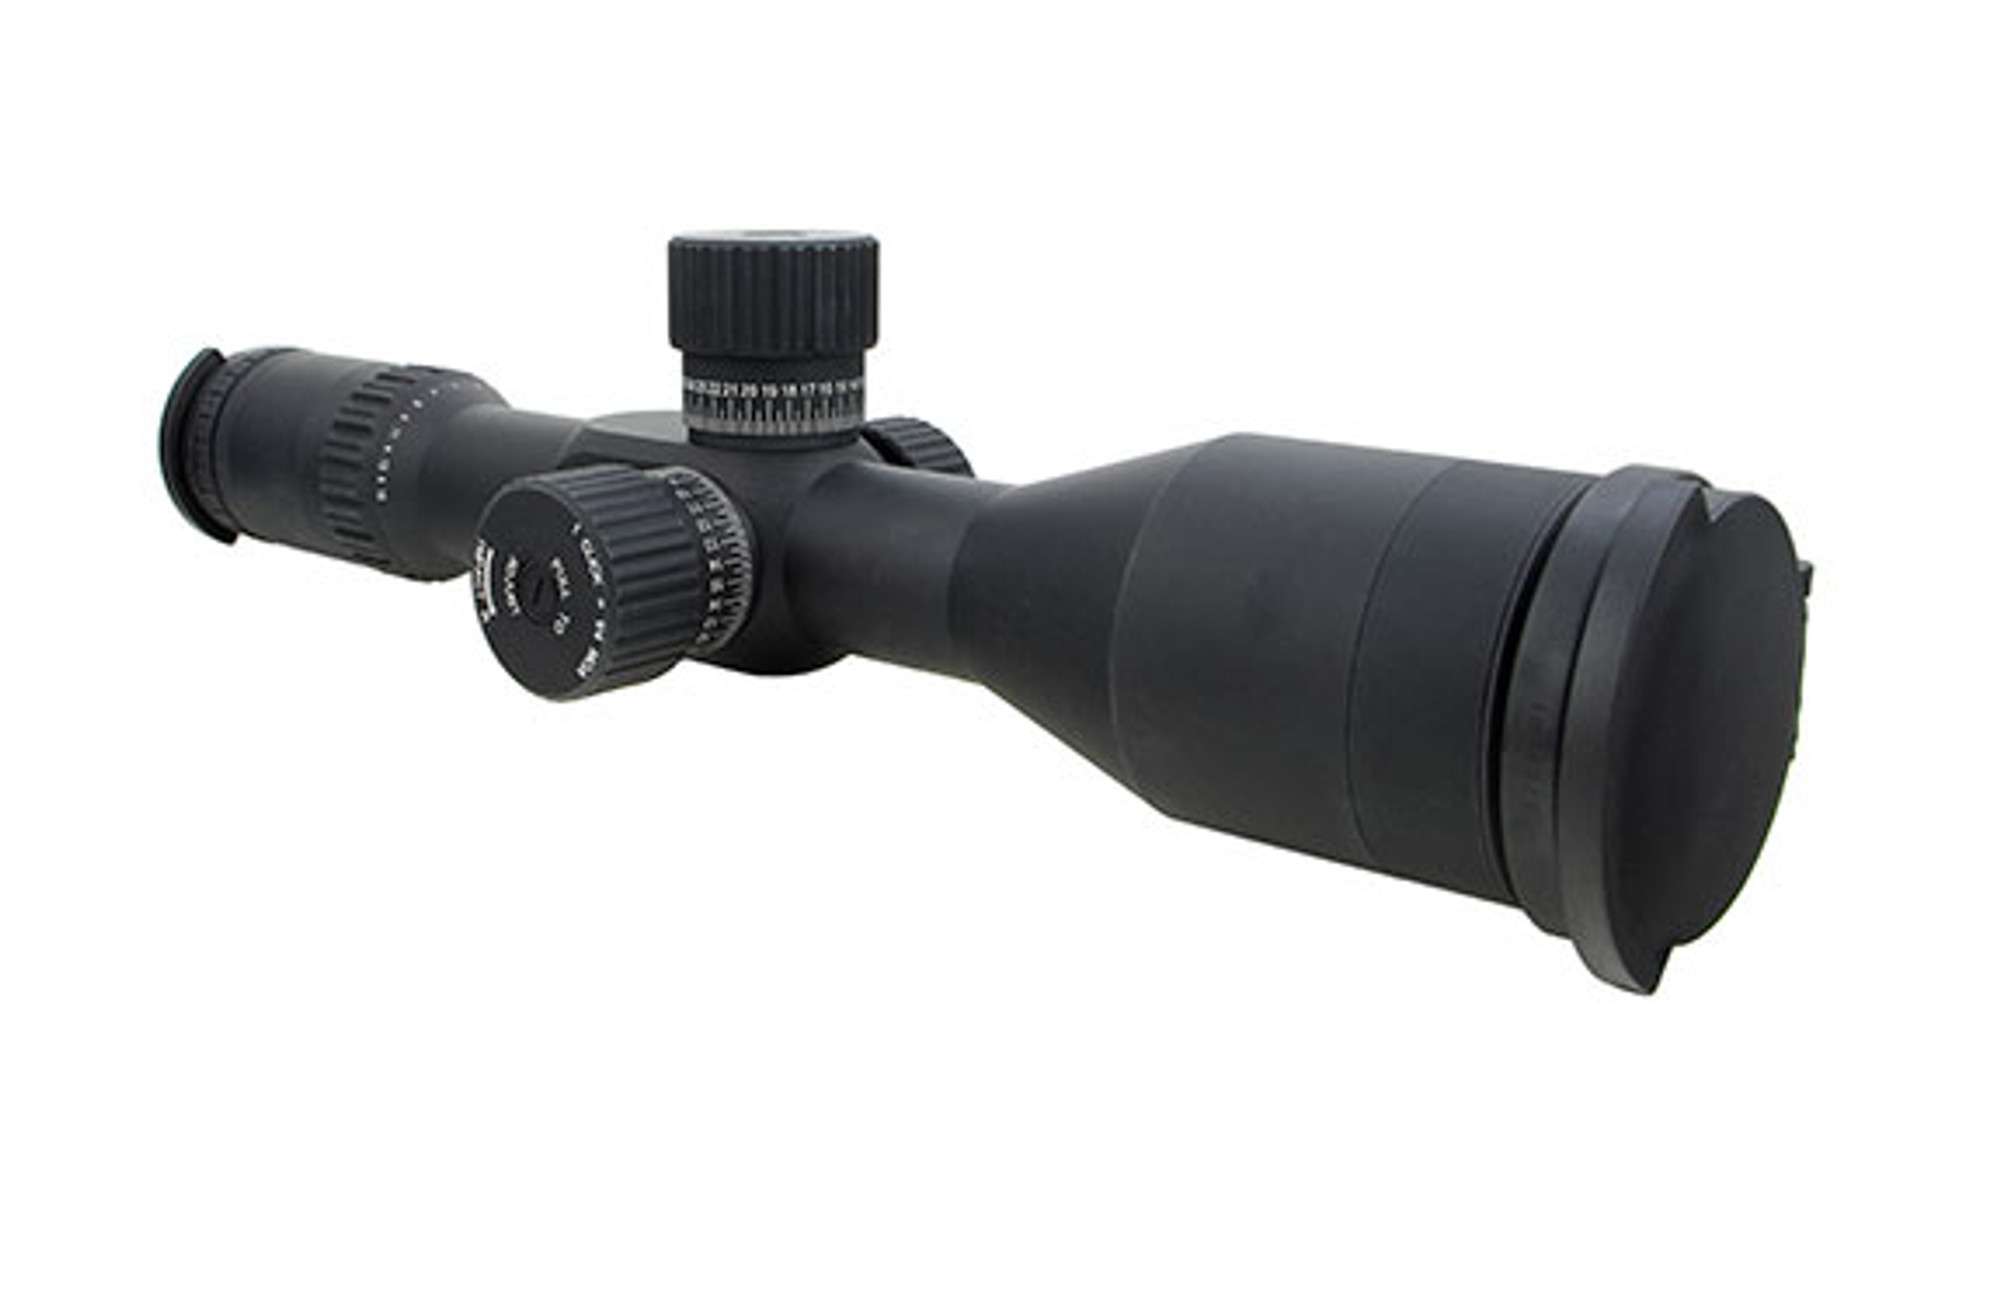 Trijicon 3-15x50 Riflescope with MOA Adjusters, MOA Reticle (Red LED)